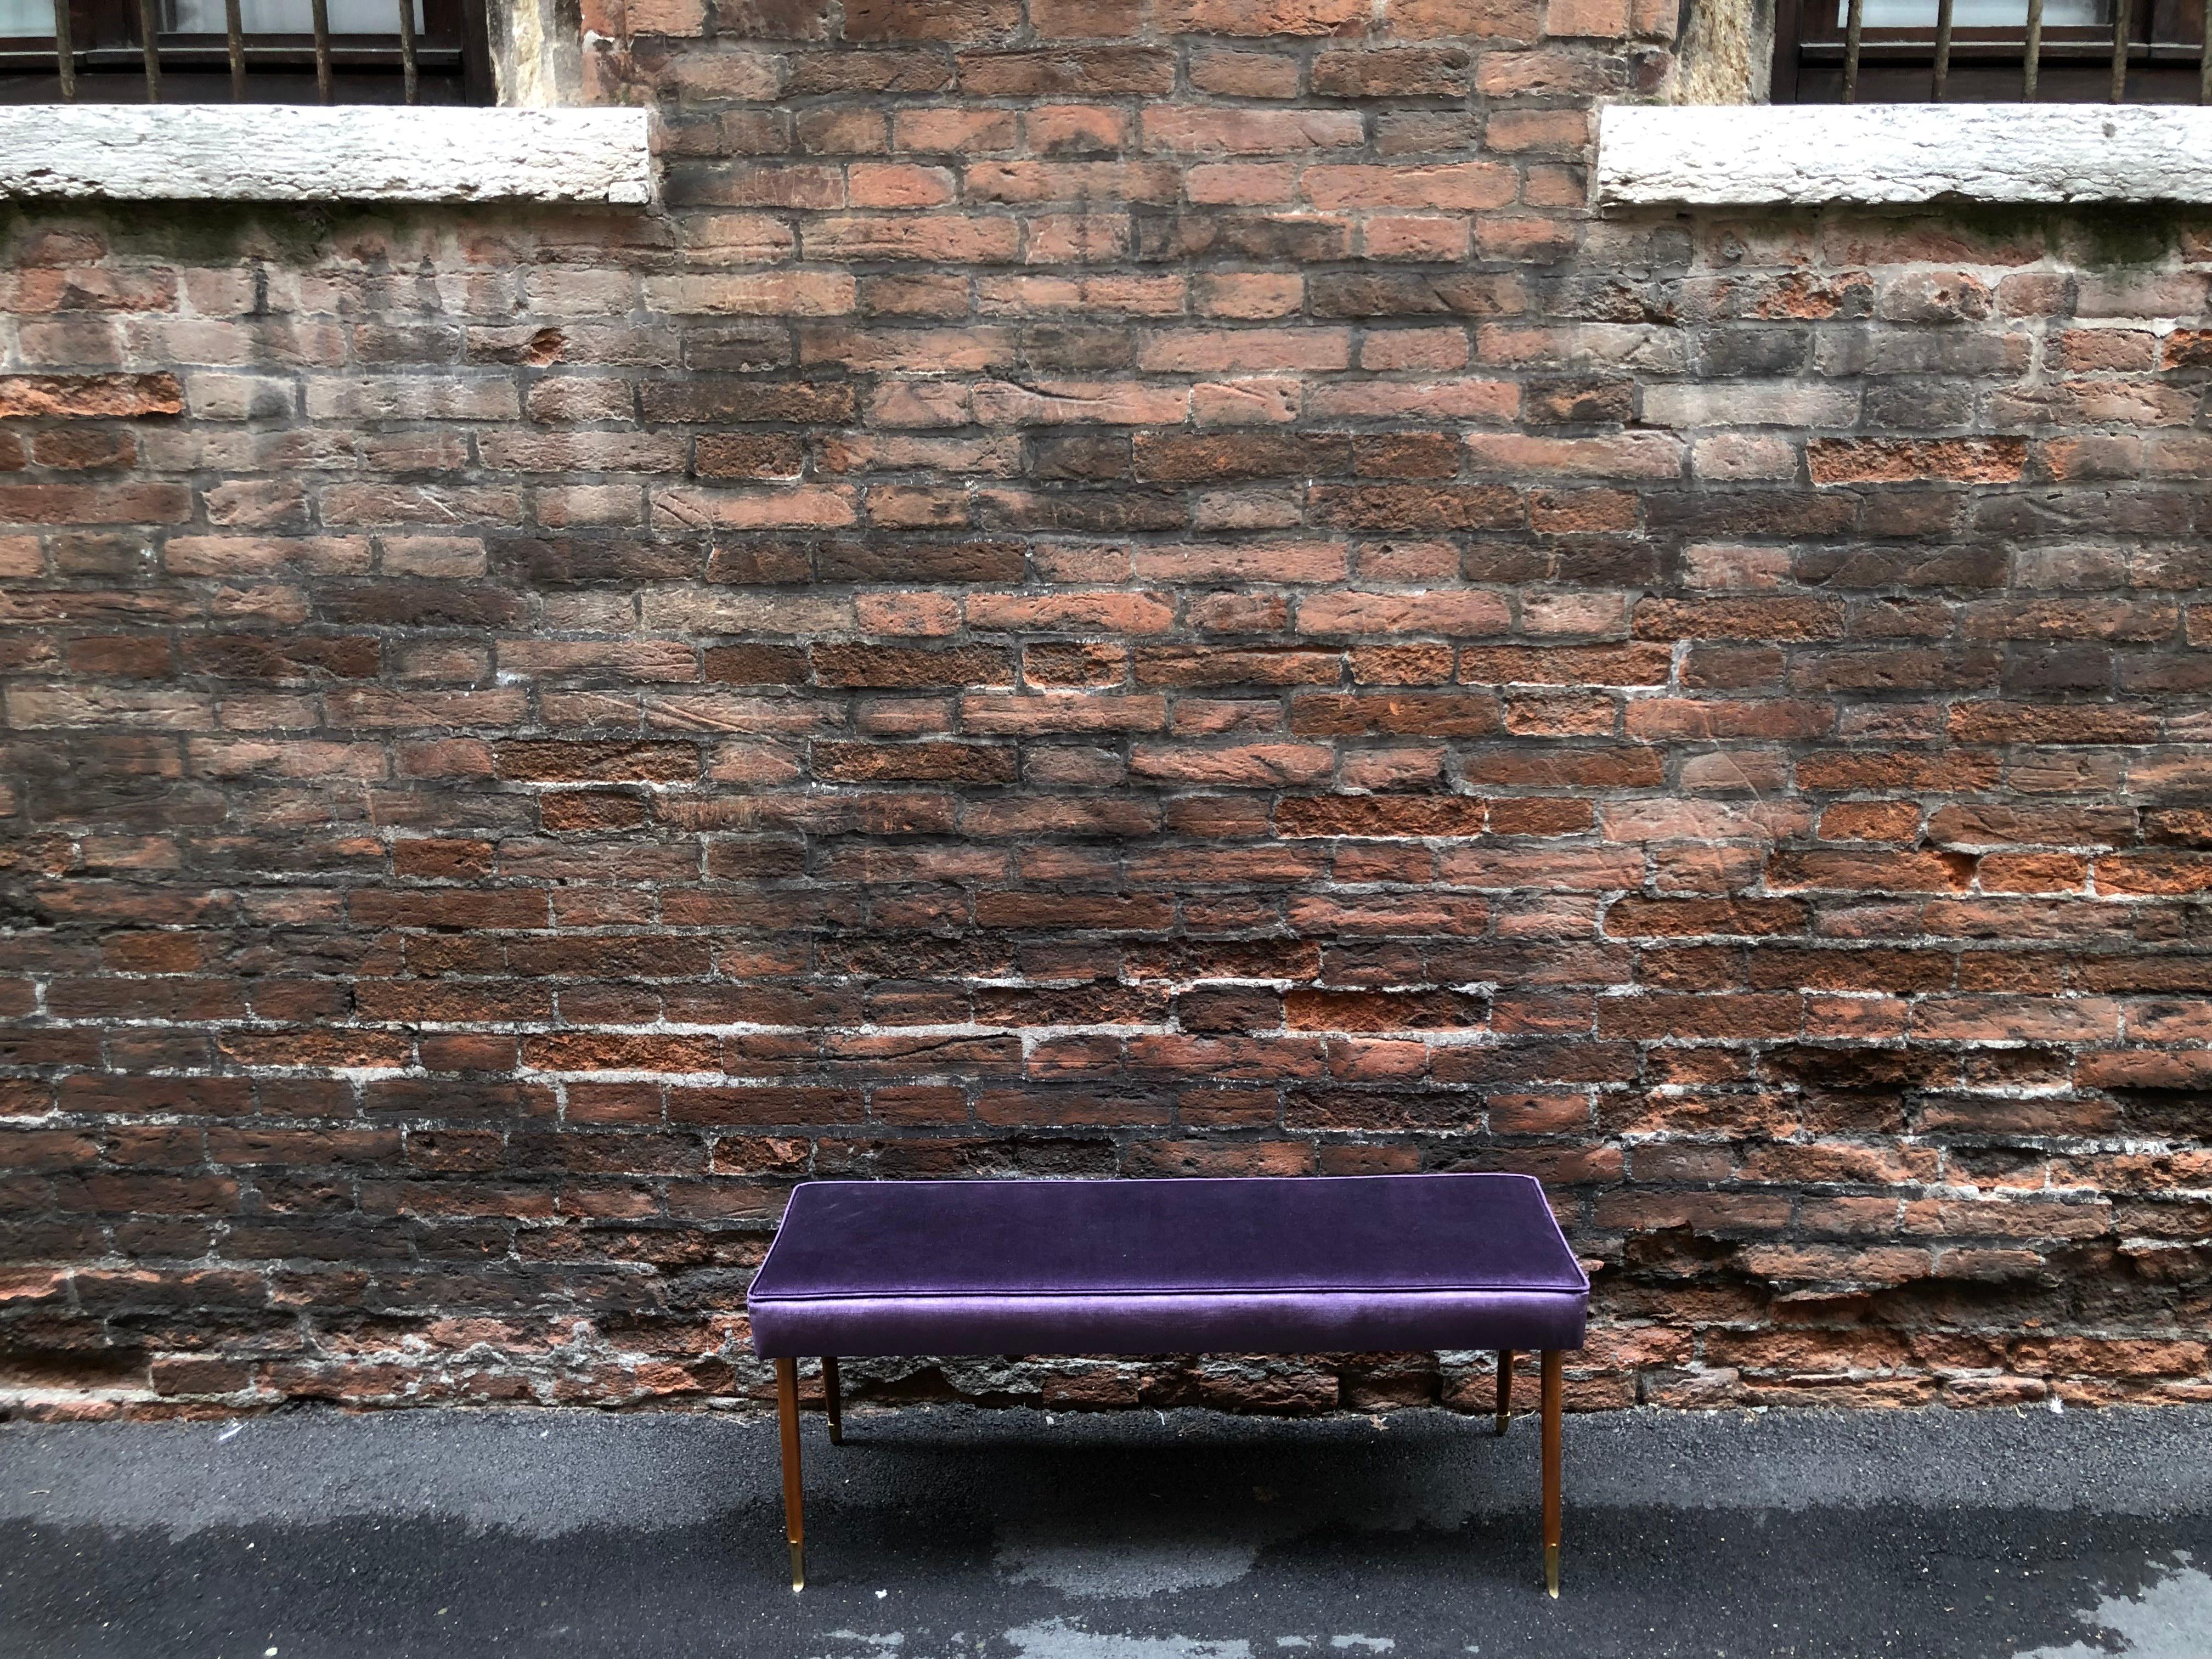 Italian Mid-Century Modernism style bench - bright purple velvet and brass ending legs bench from Italy from 1950s period. Reupholstered and restored in the wooden parts.

Size: 102 x 37 x H 42 cm - 40.15